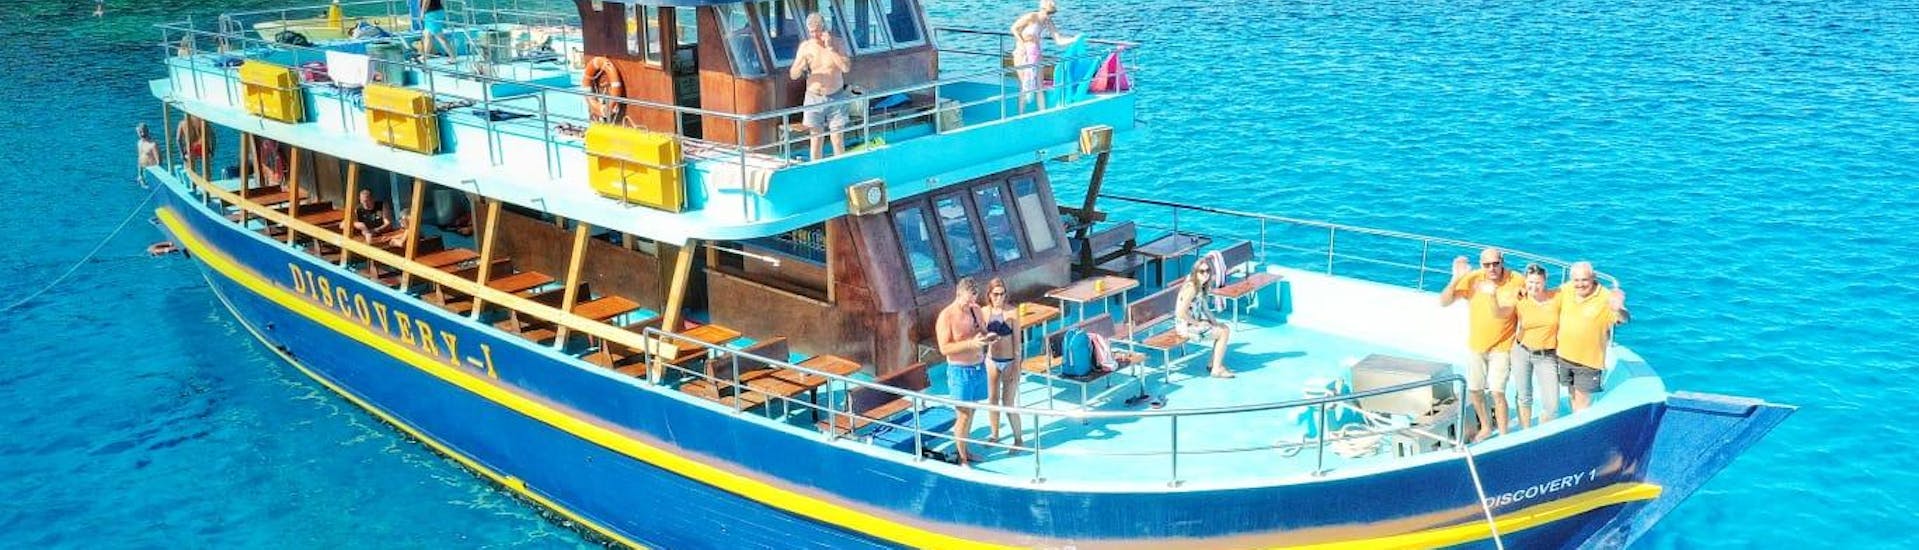 Passengers enjoying their boat trip to Ayia Napa with Discovery Cruises.